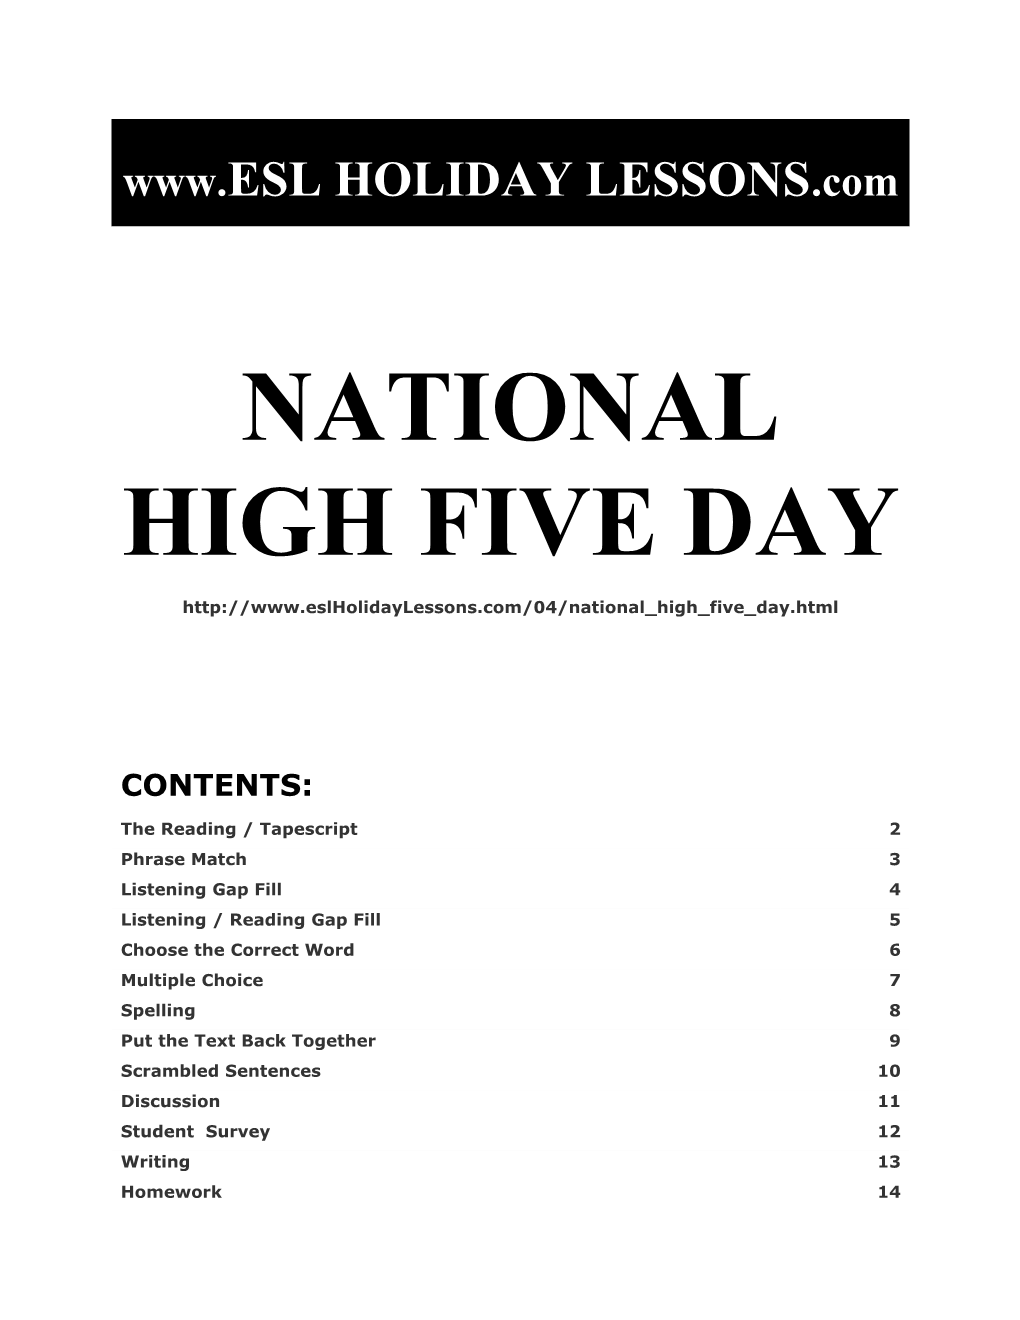 Holiday Lessons - National High Five Day